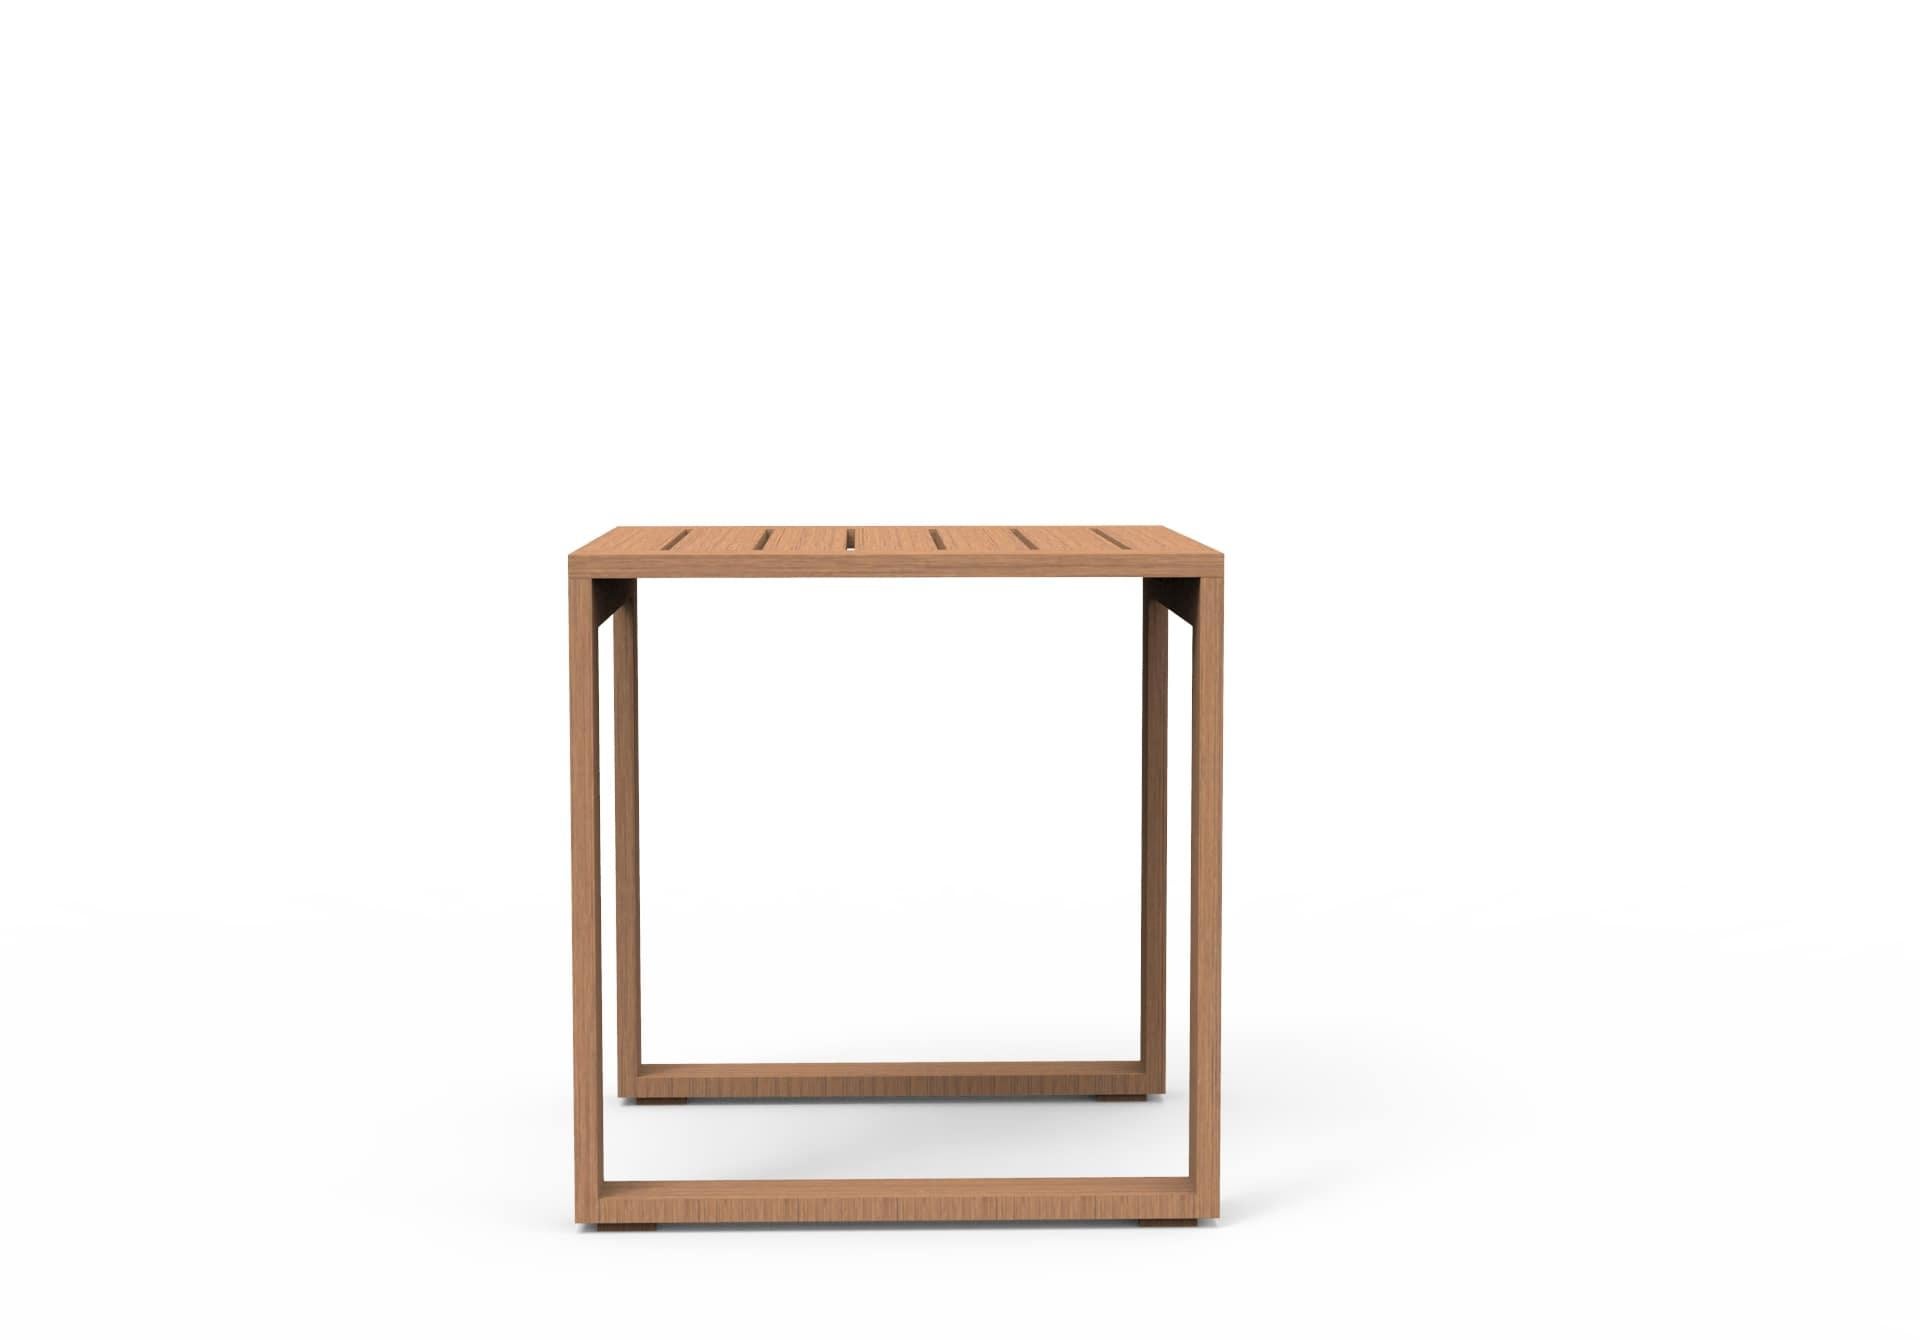 With it’s simple design, the Brixton side table’s wide base and solid construction makes this a remarkable design for years to come. All CAVAN furniture is made by hand, upon order, with Grade-A teak wood. Dimensions & finishes are customizable upon